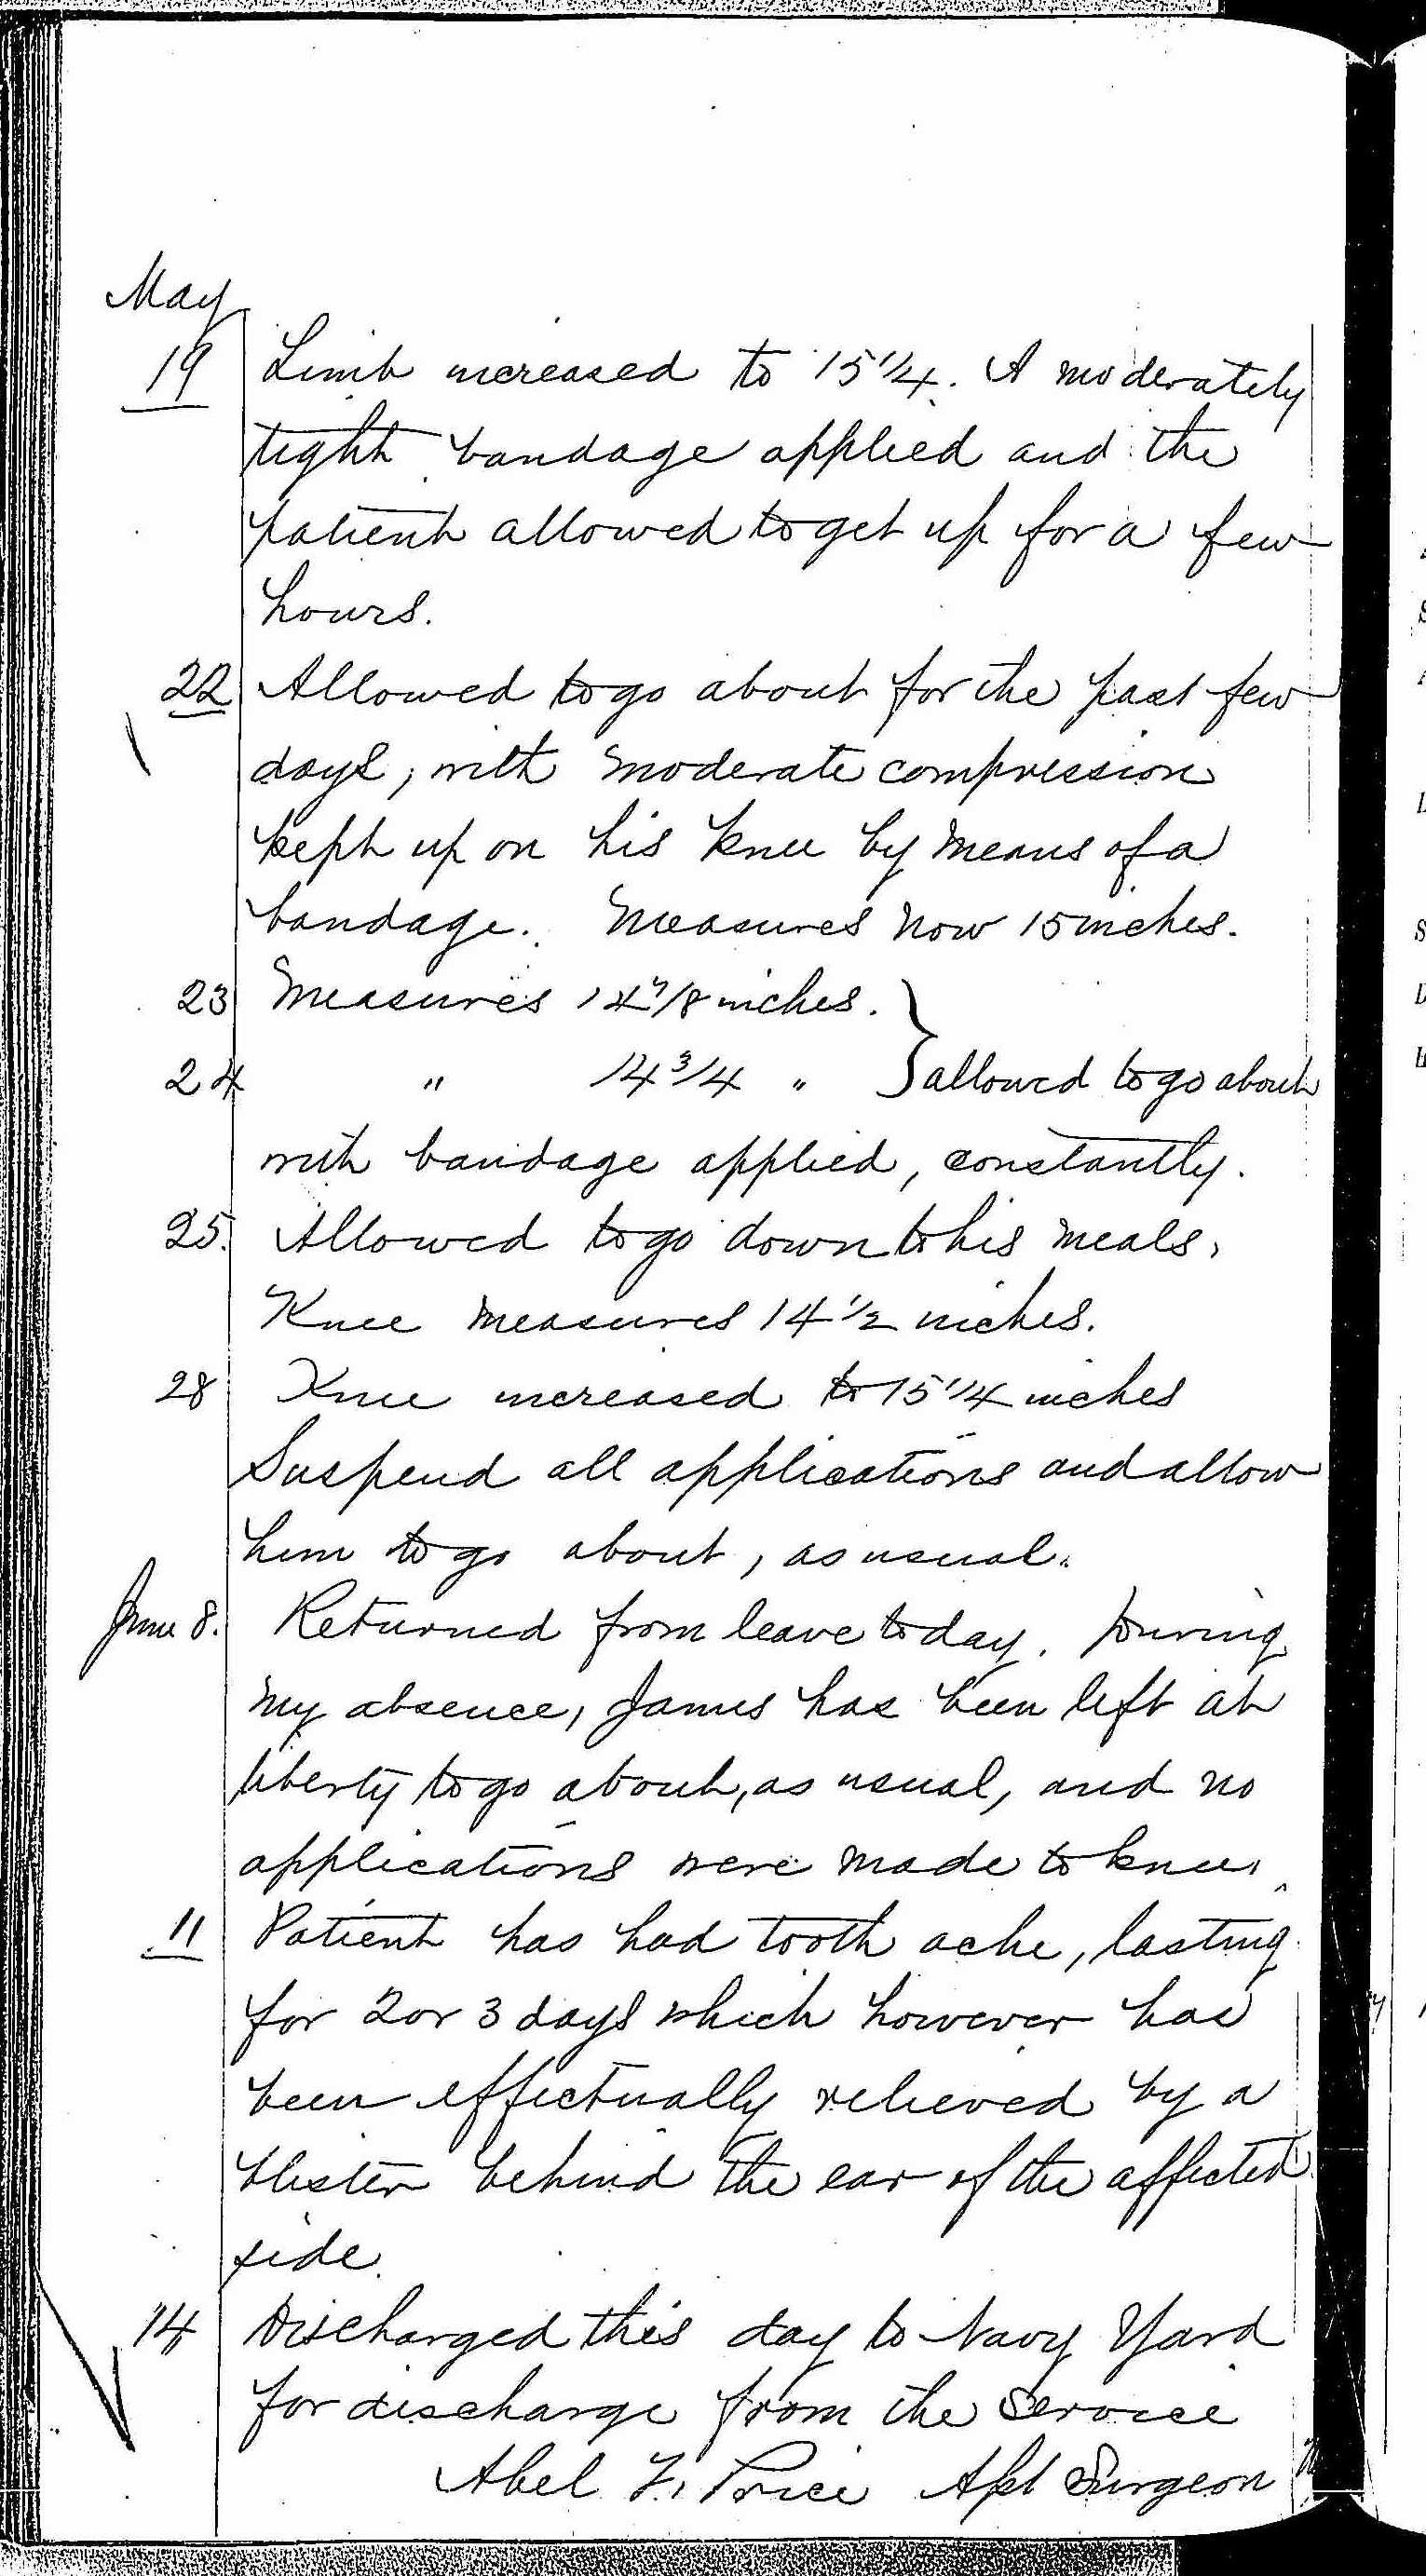 Entry for Henry James (page 8 of 8) in the log Hospital Tickets and Case Papers - Naval Hospital - Washington, D.C. - 1868-69